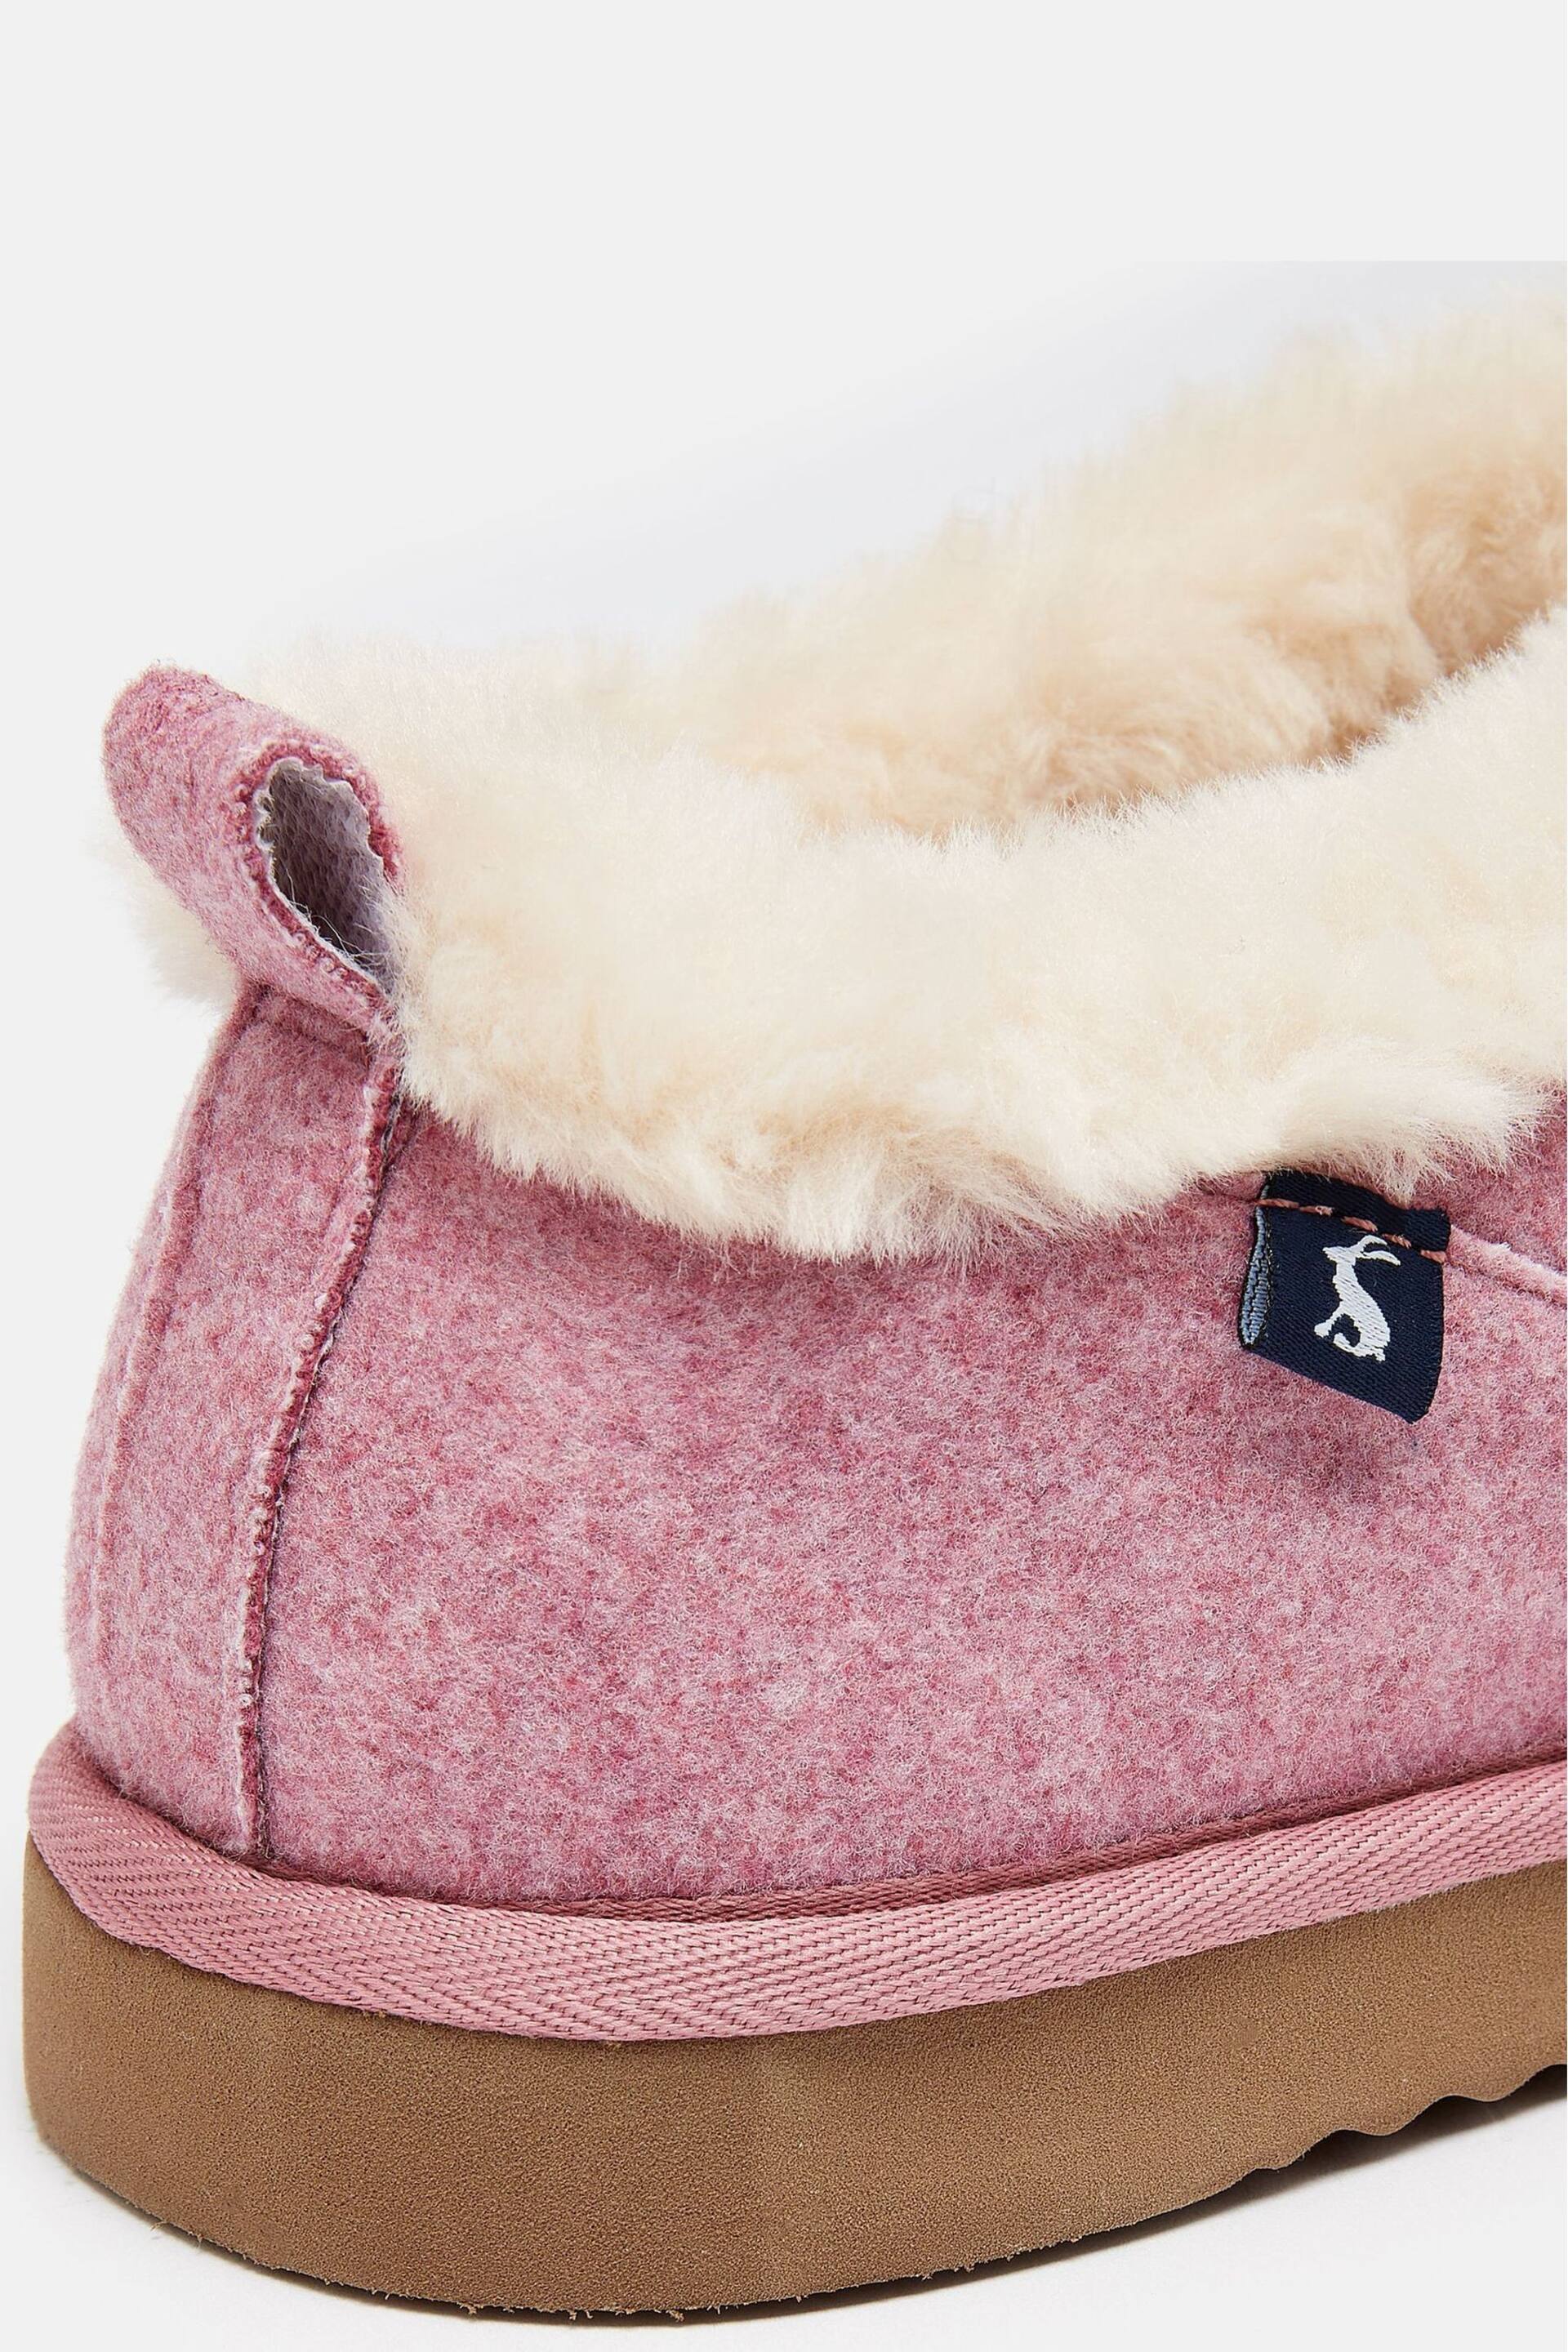 Joules Women's Lazydays Pink Faux Fur Lined Slippers - Image 5 of 5